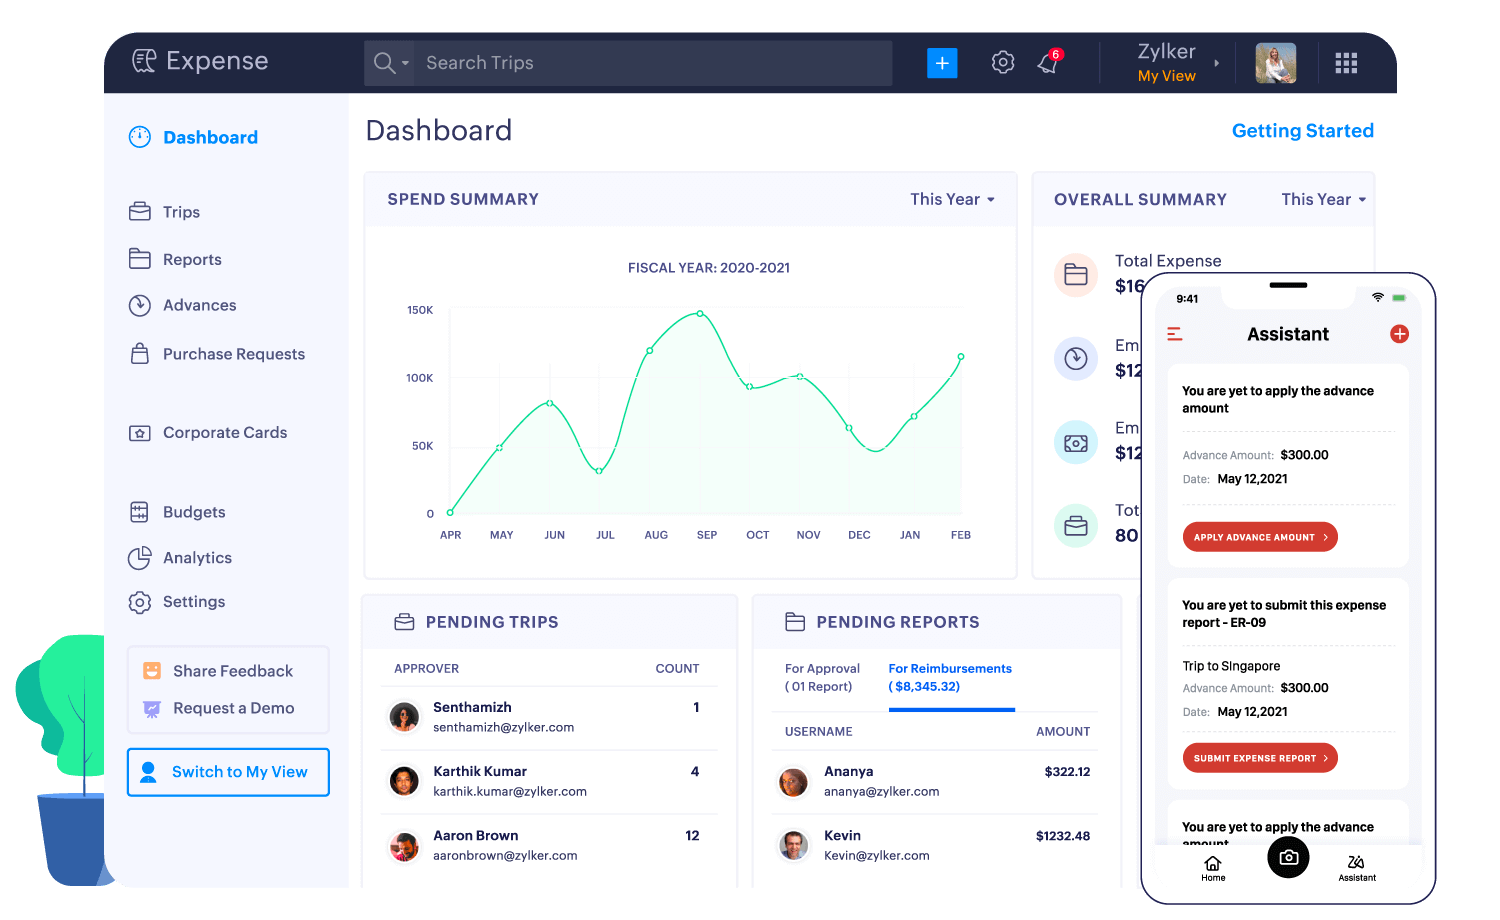 Manufacturing expense dashboard summary